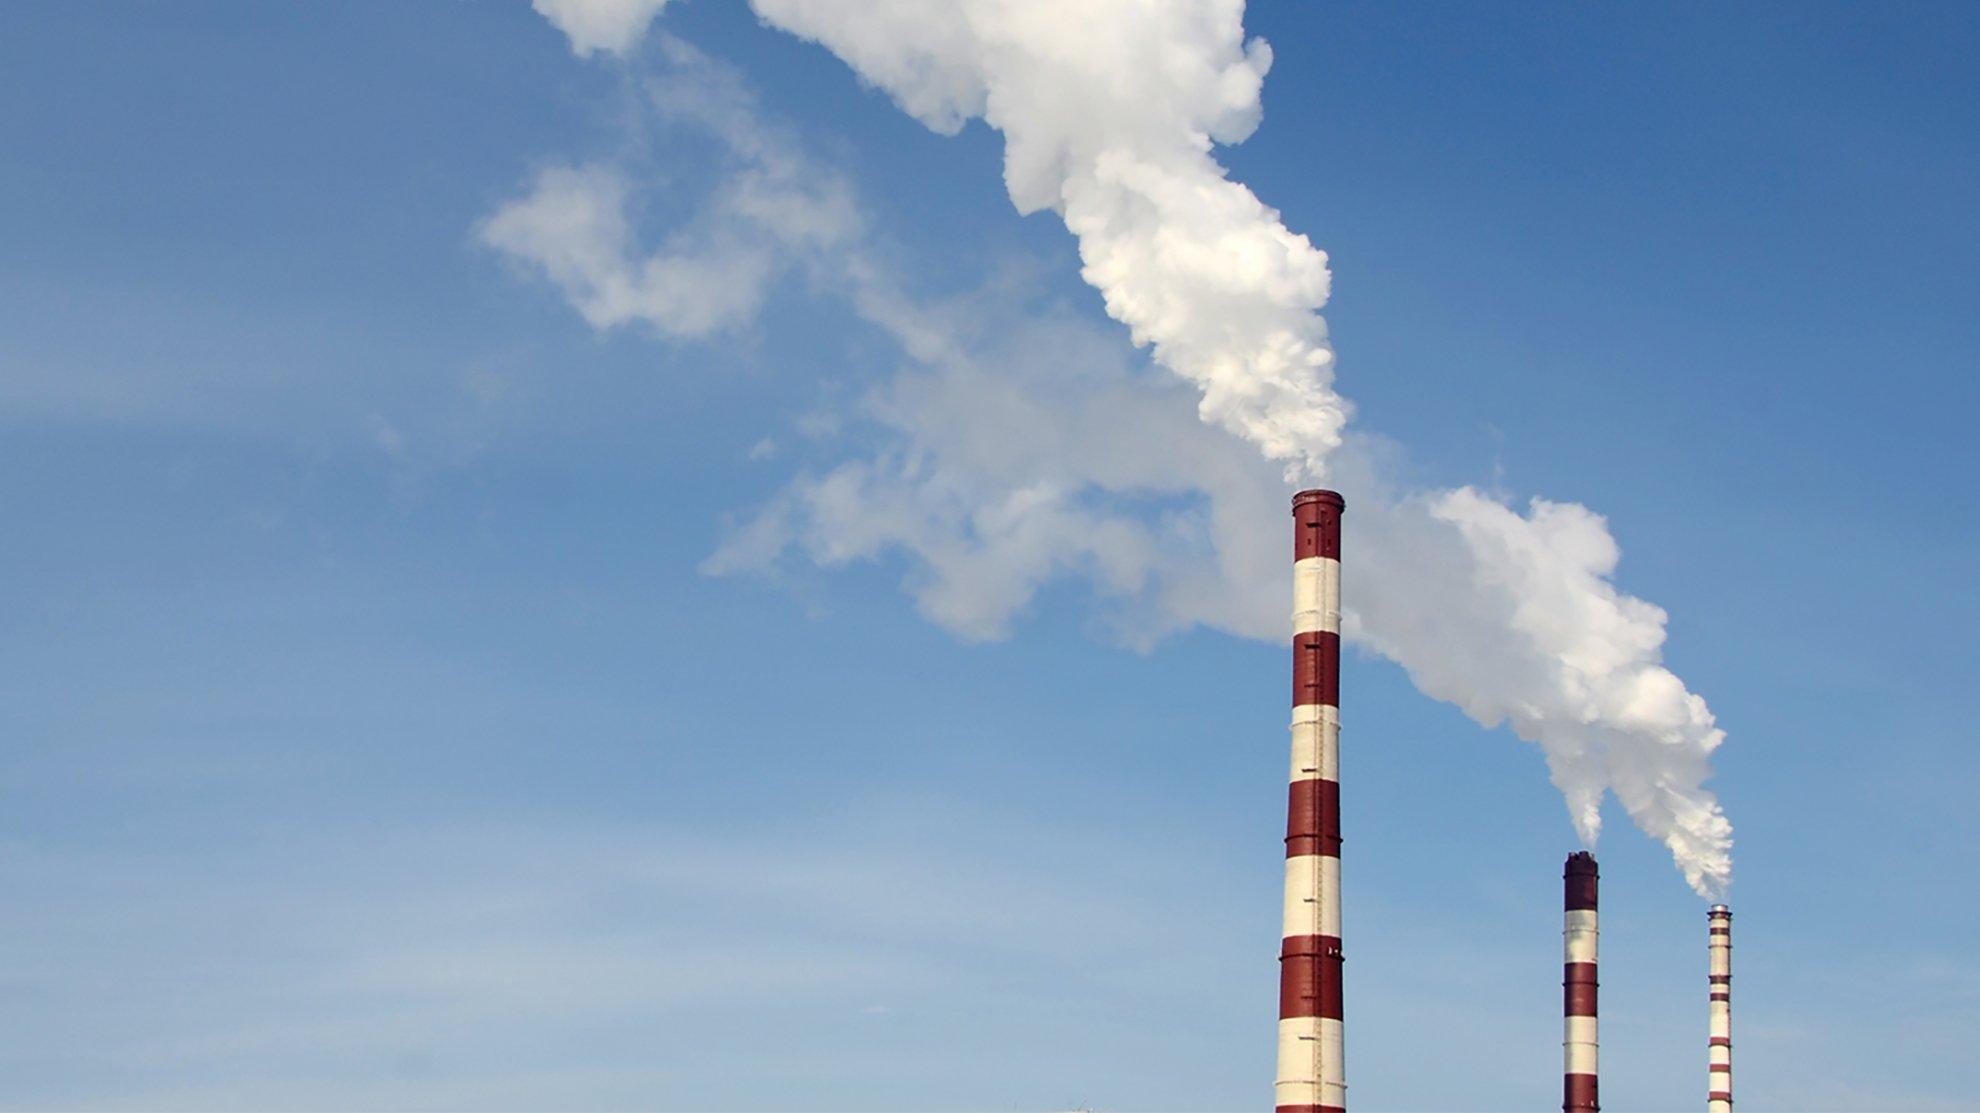 Against a blue sky, white smoke billows out of three red and white industrial chimneys.